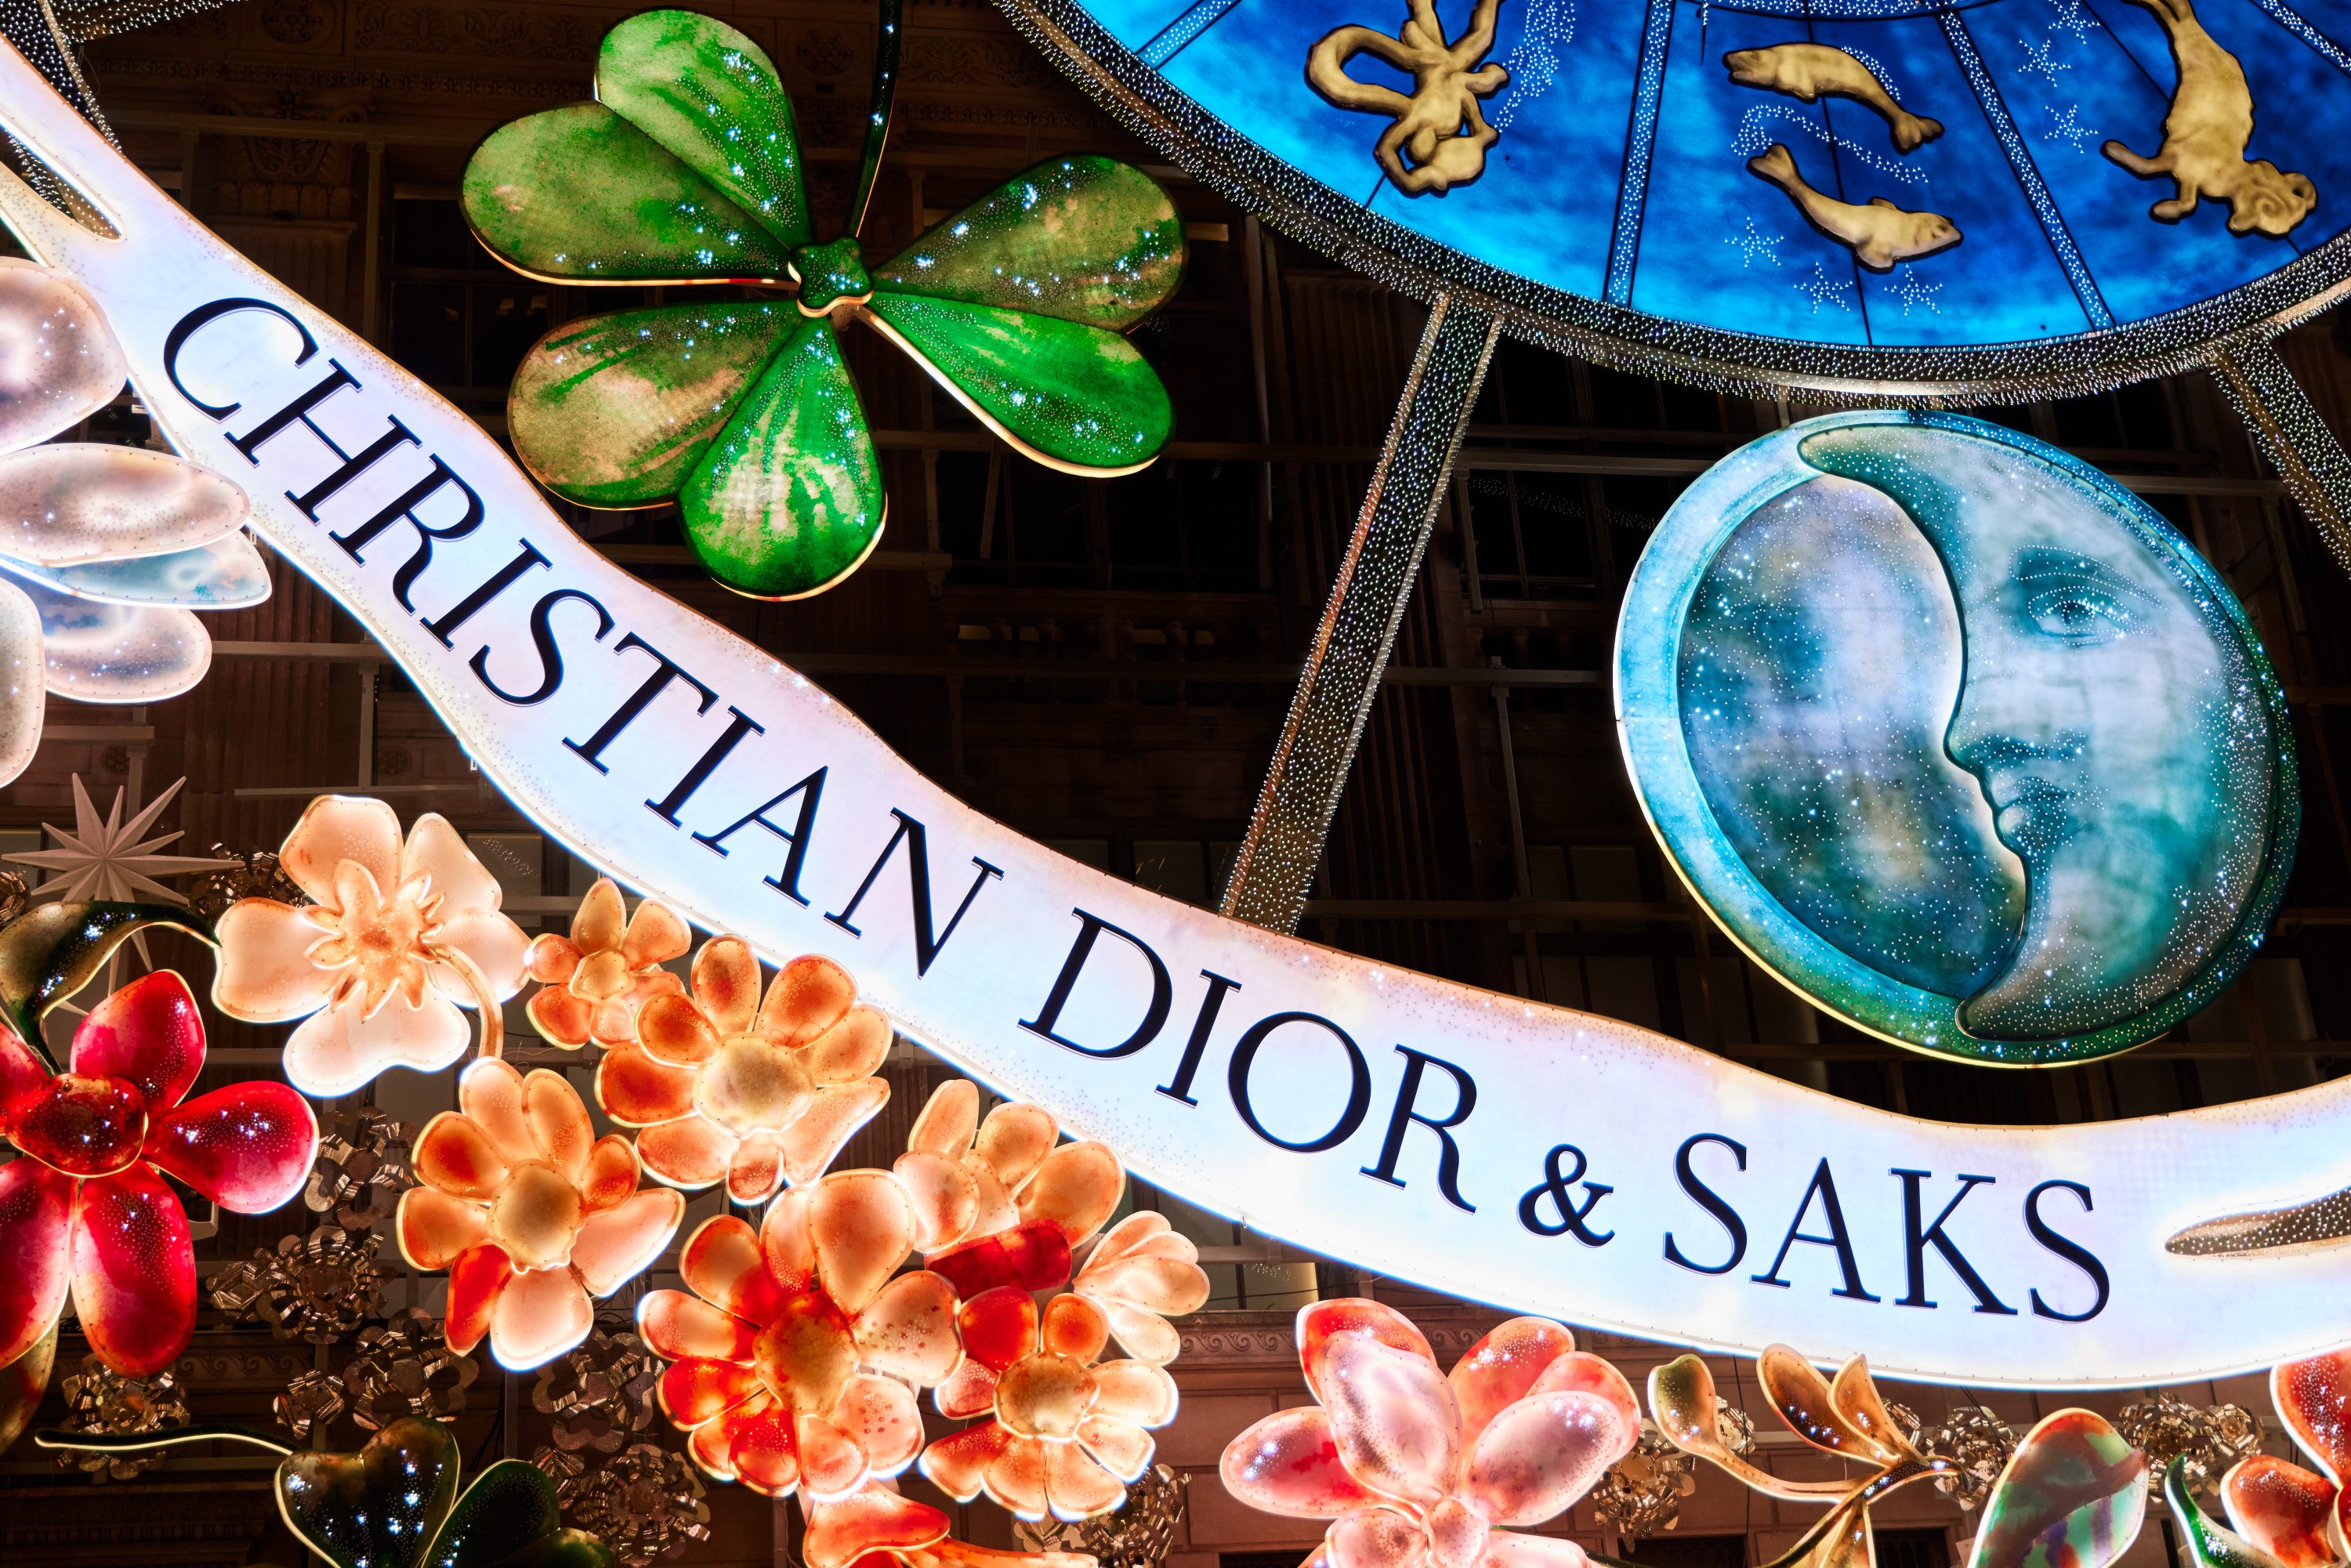 Dior and Saks Present 'Carousel of Dreams' on Fifth Avenue